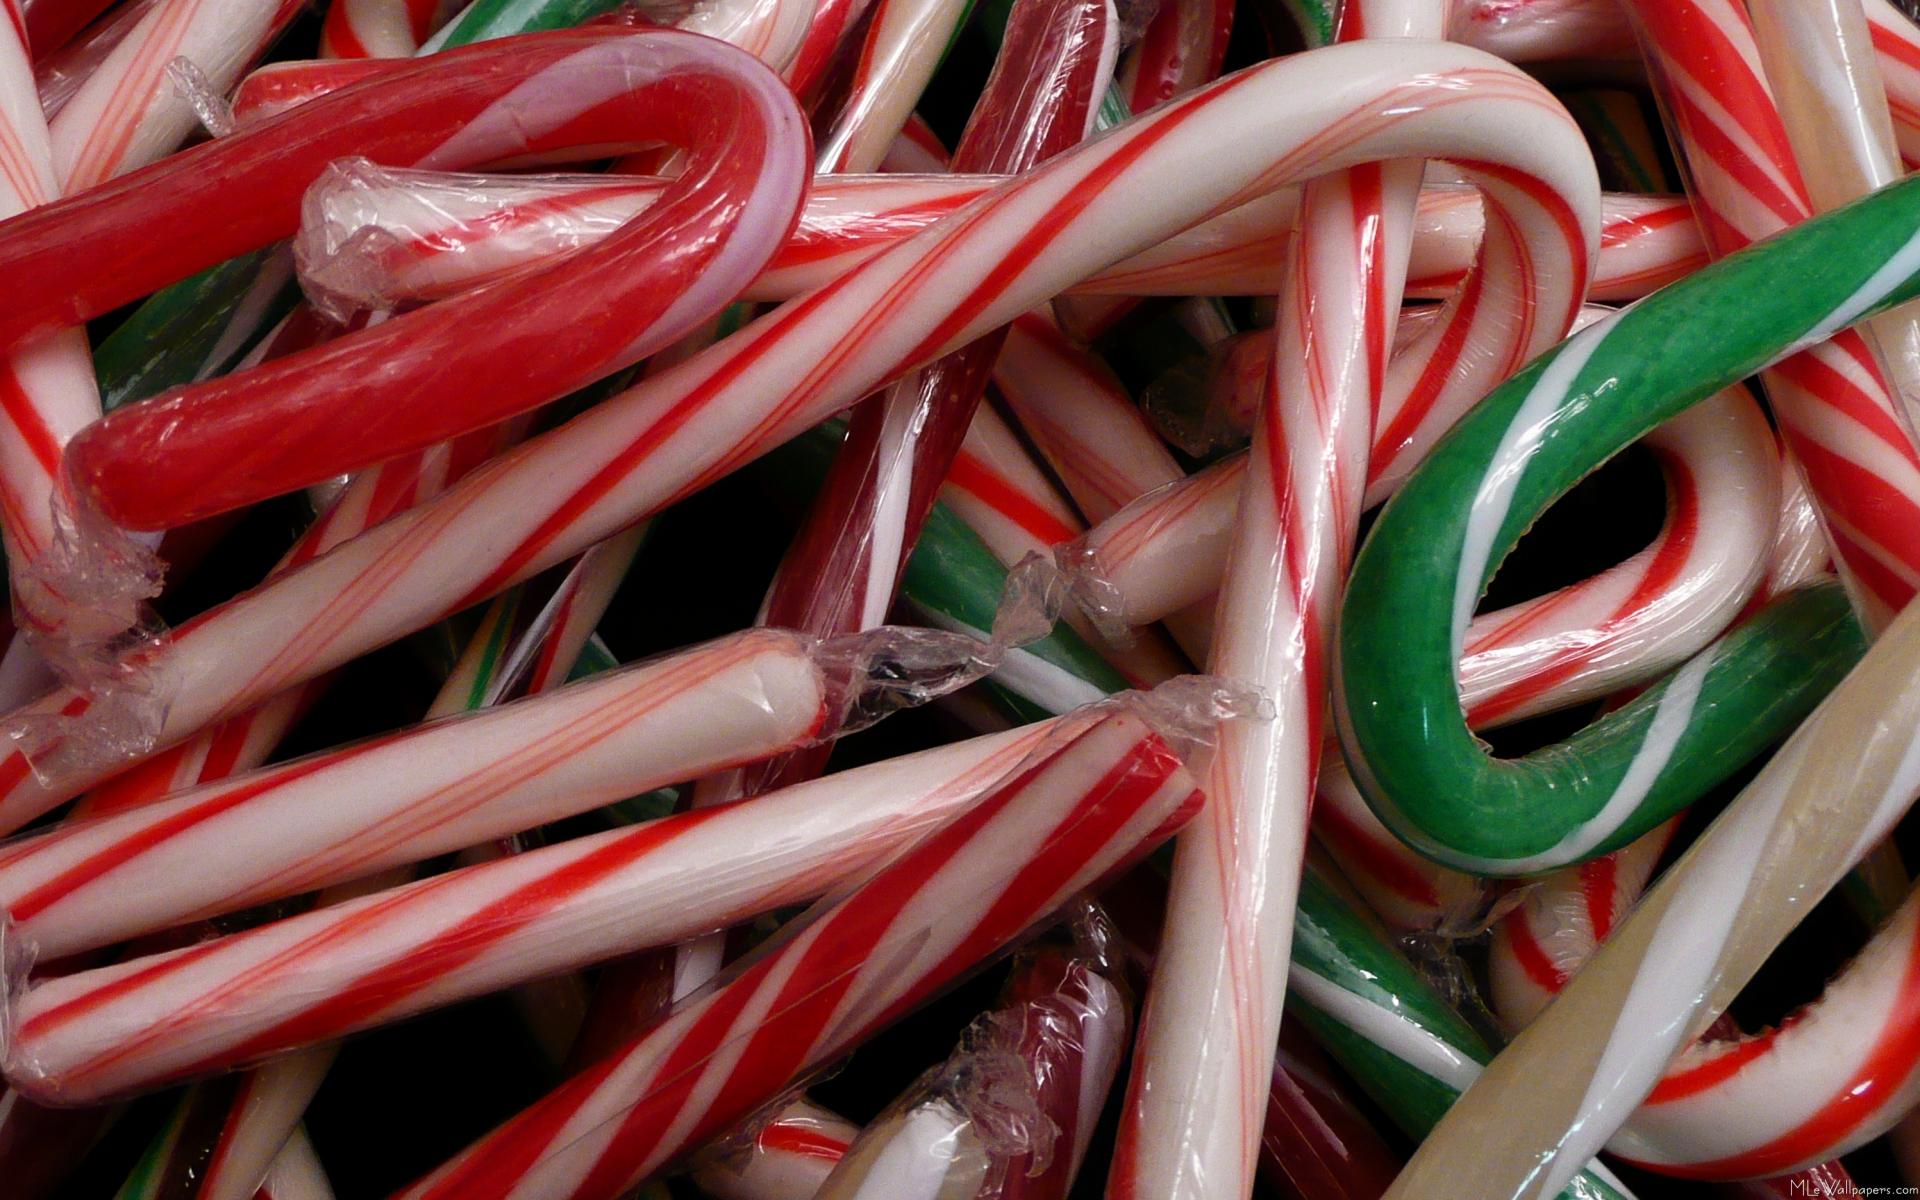 MLeWallpapers.com - Candy Canes